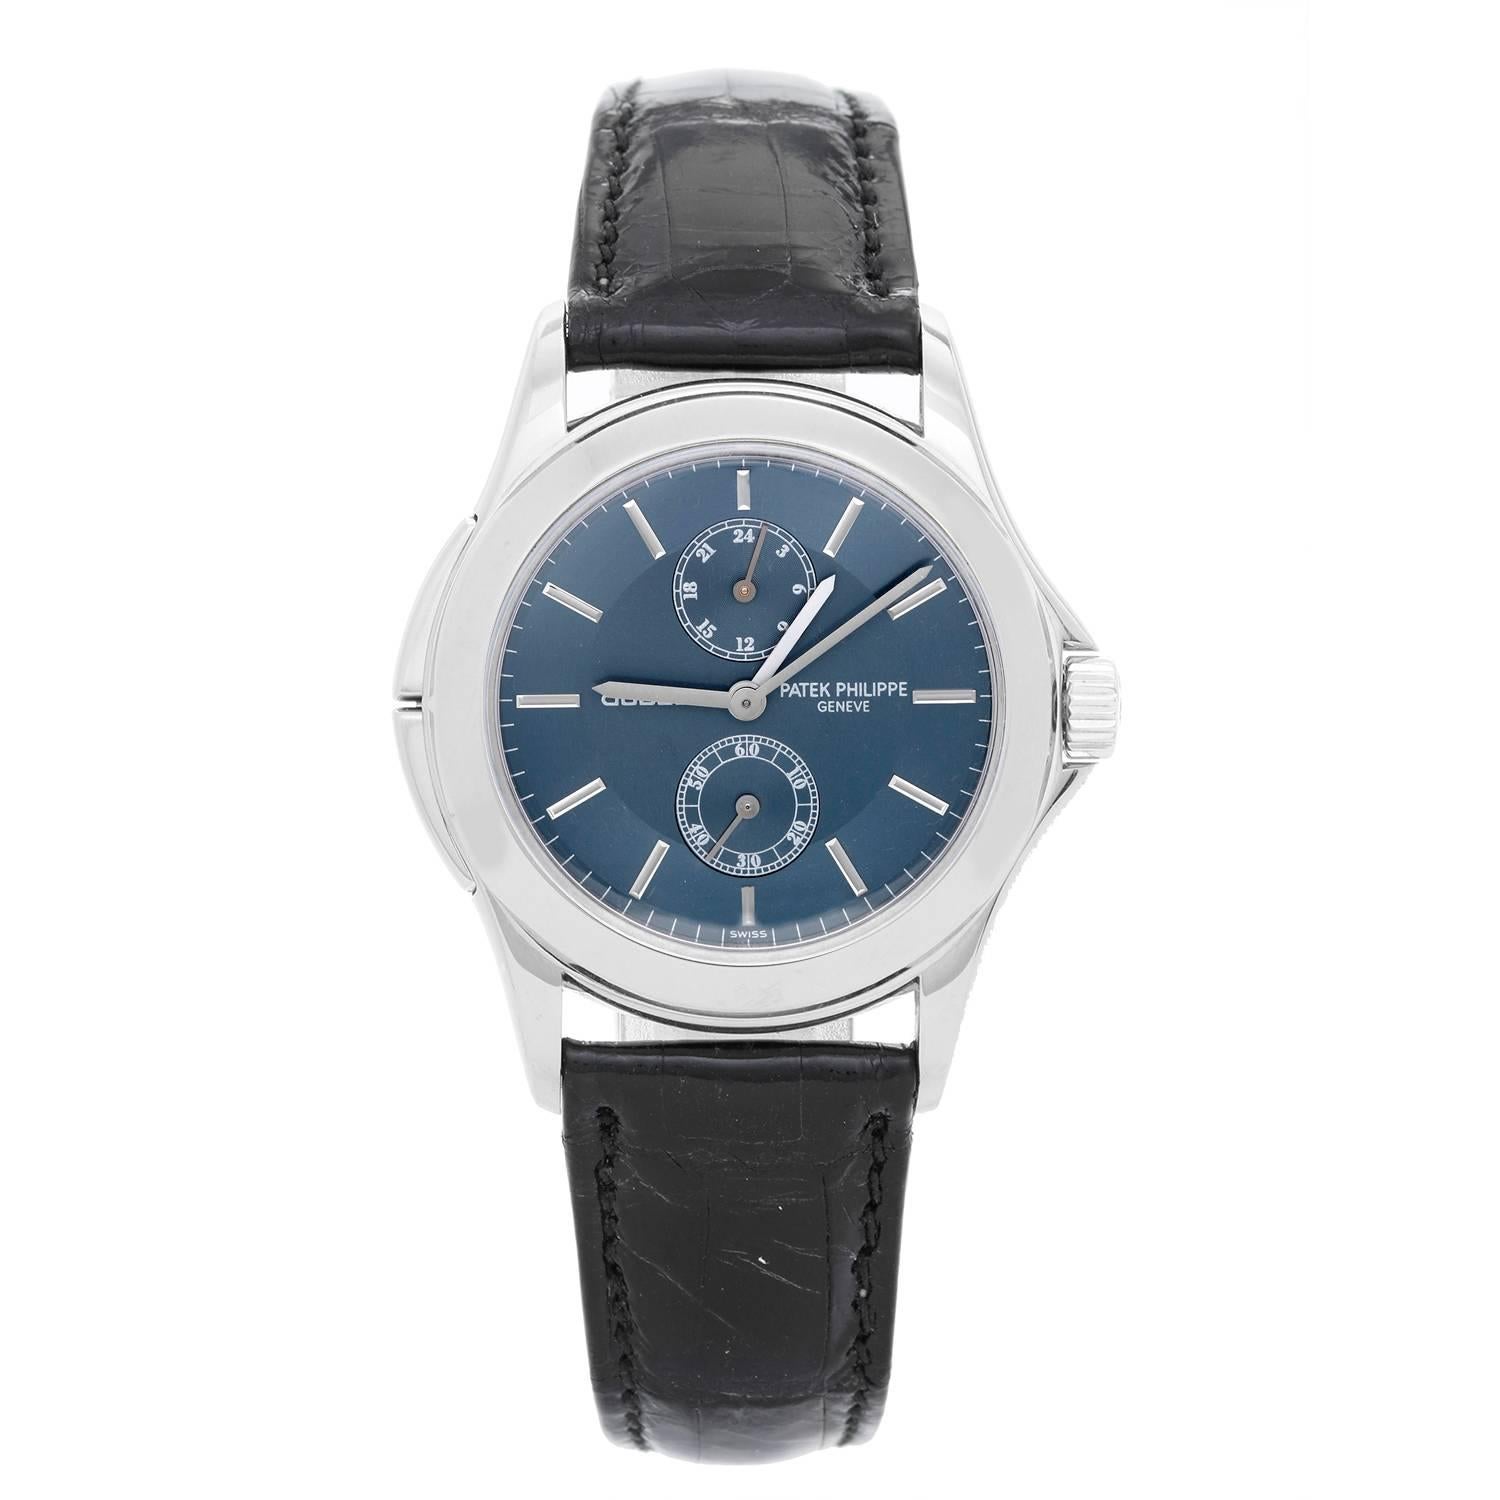 Patek Philippe & Co. Calatrava Travel Time 150th Anniversary of Gubelin Ref 5134 – Very rare watch with only 45 pieces made in white gold with blue dial. 150 pieces in total with different cases. The watch is automatic, with an 18k White Gold case